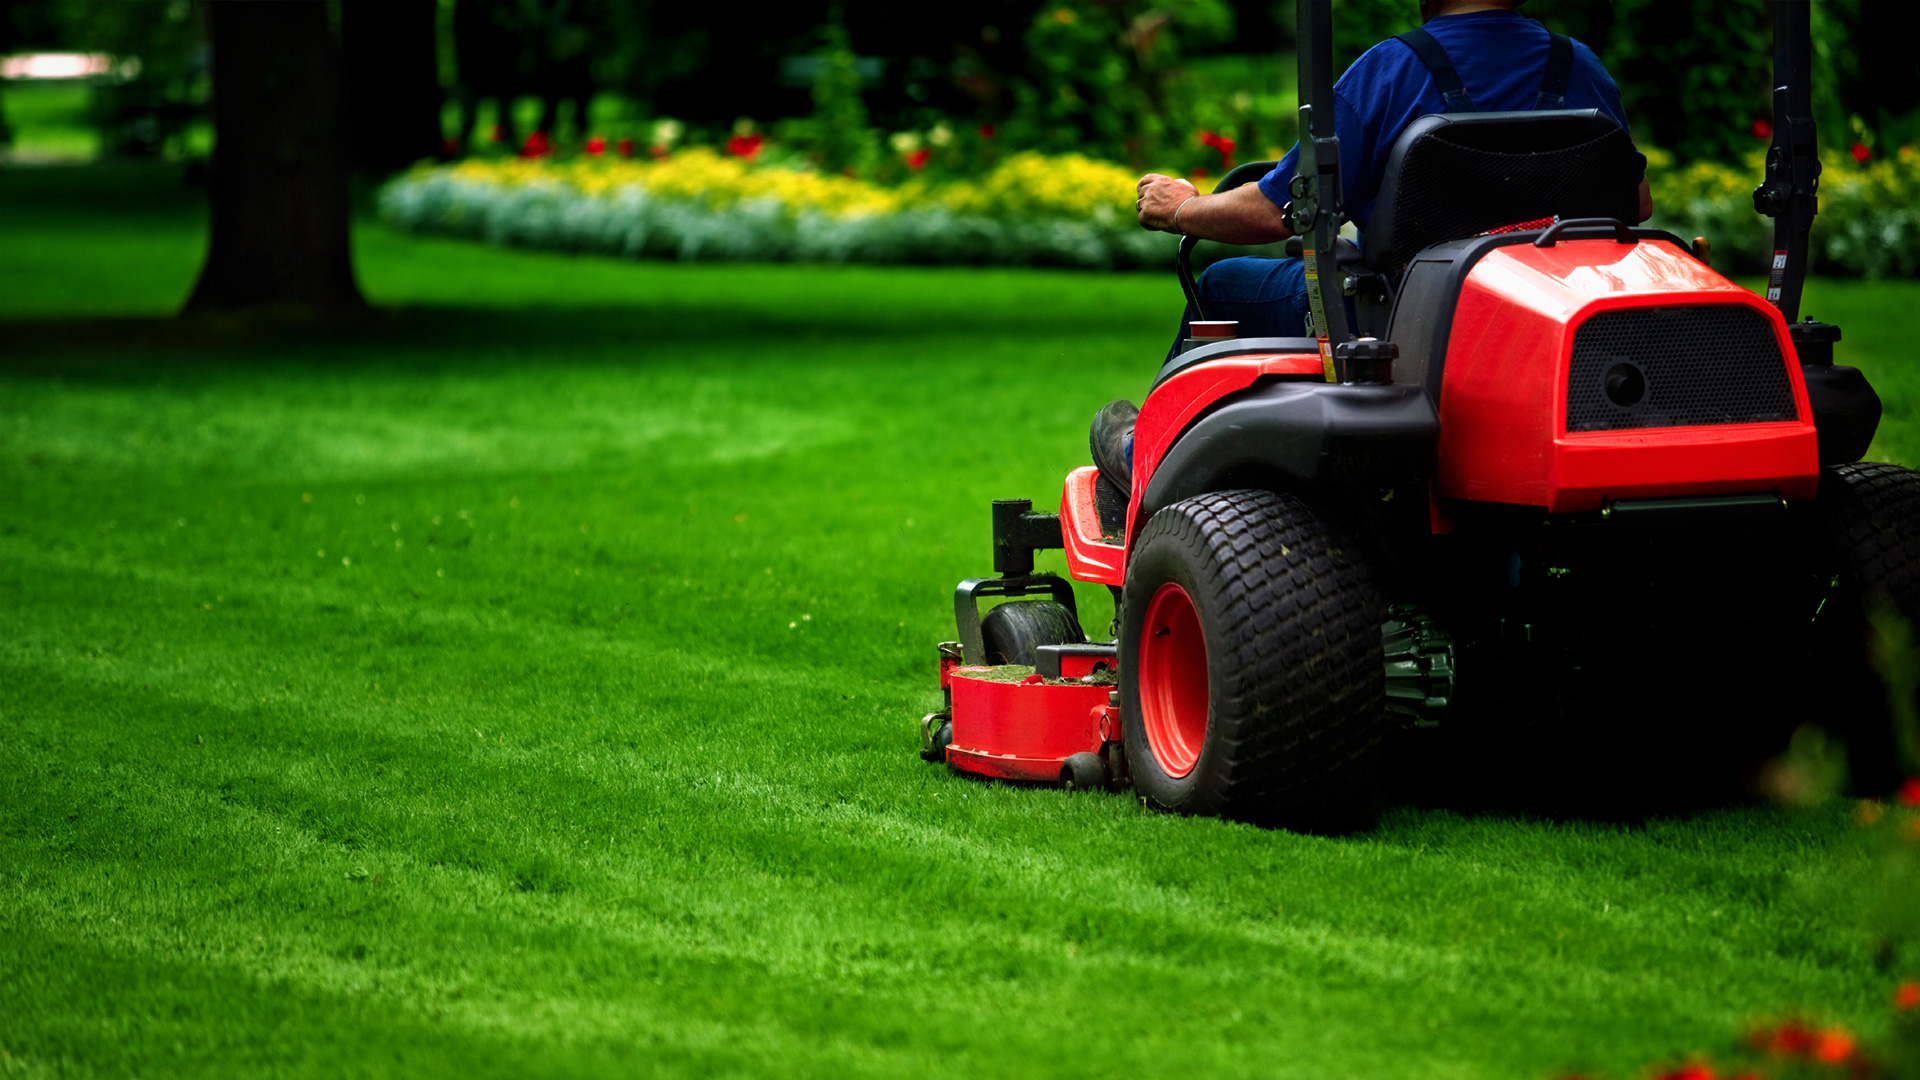 Lawn Weed Control